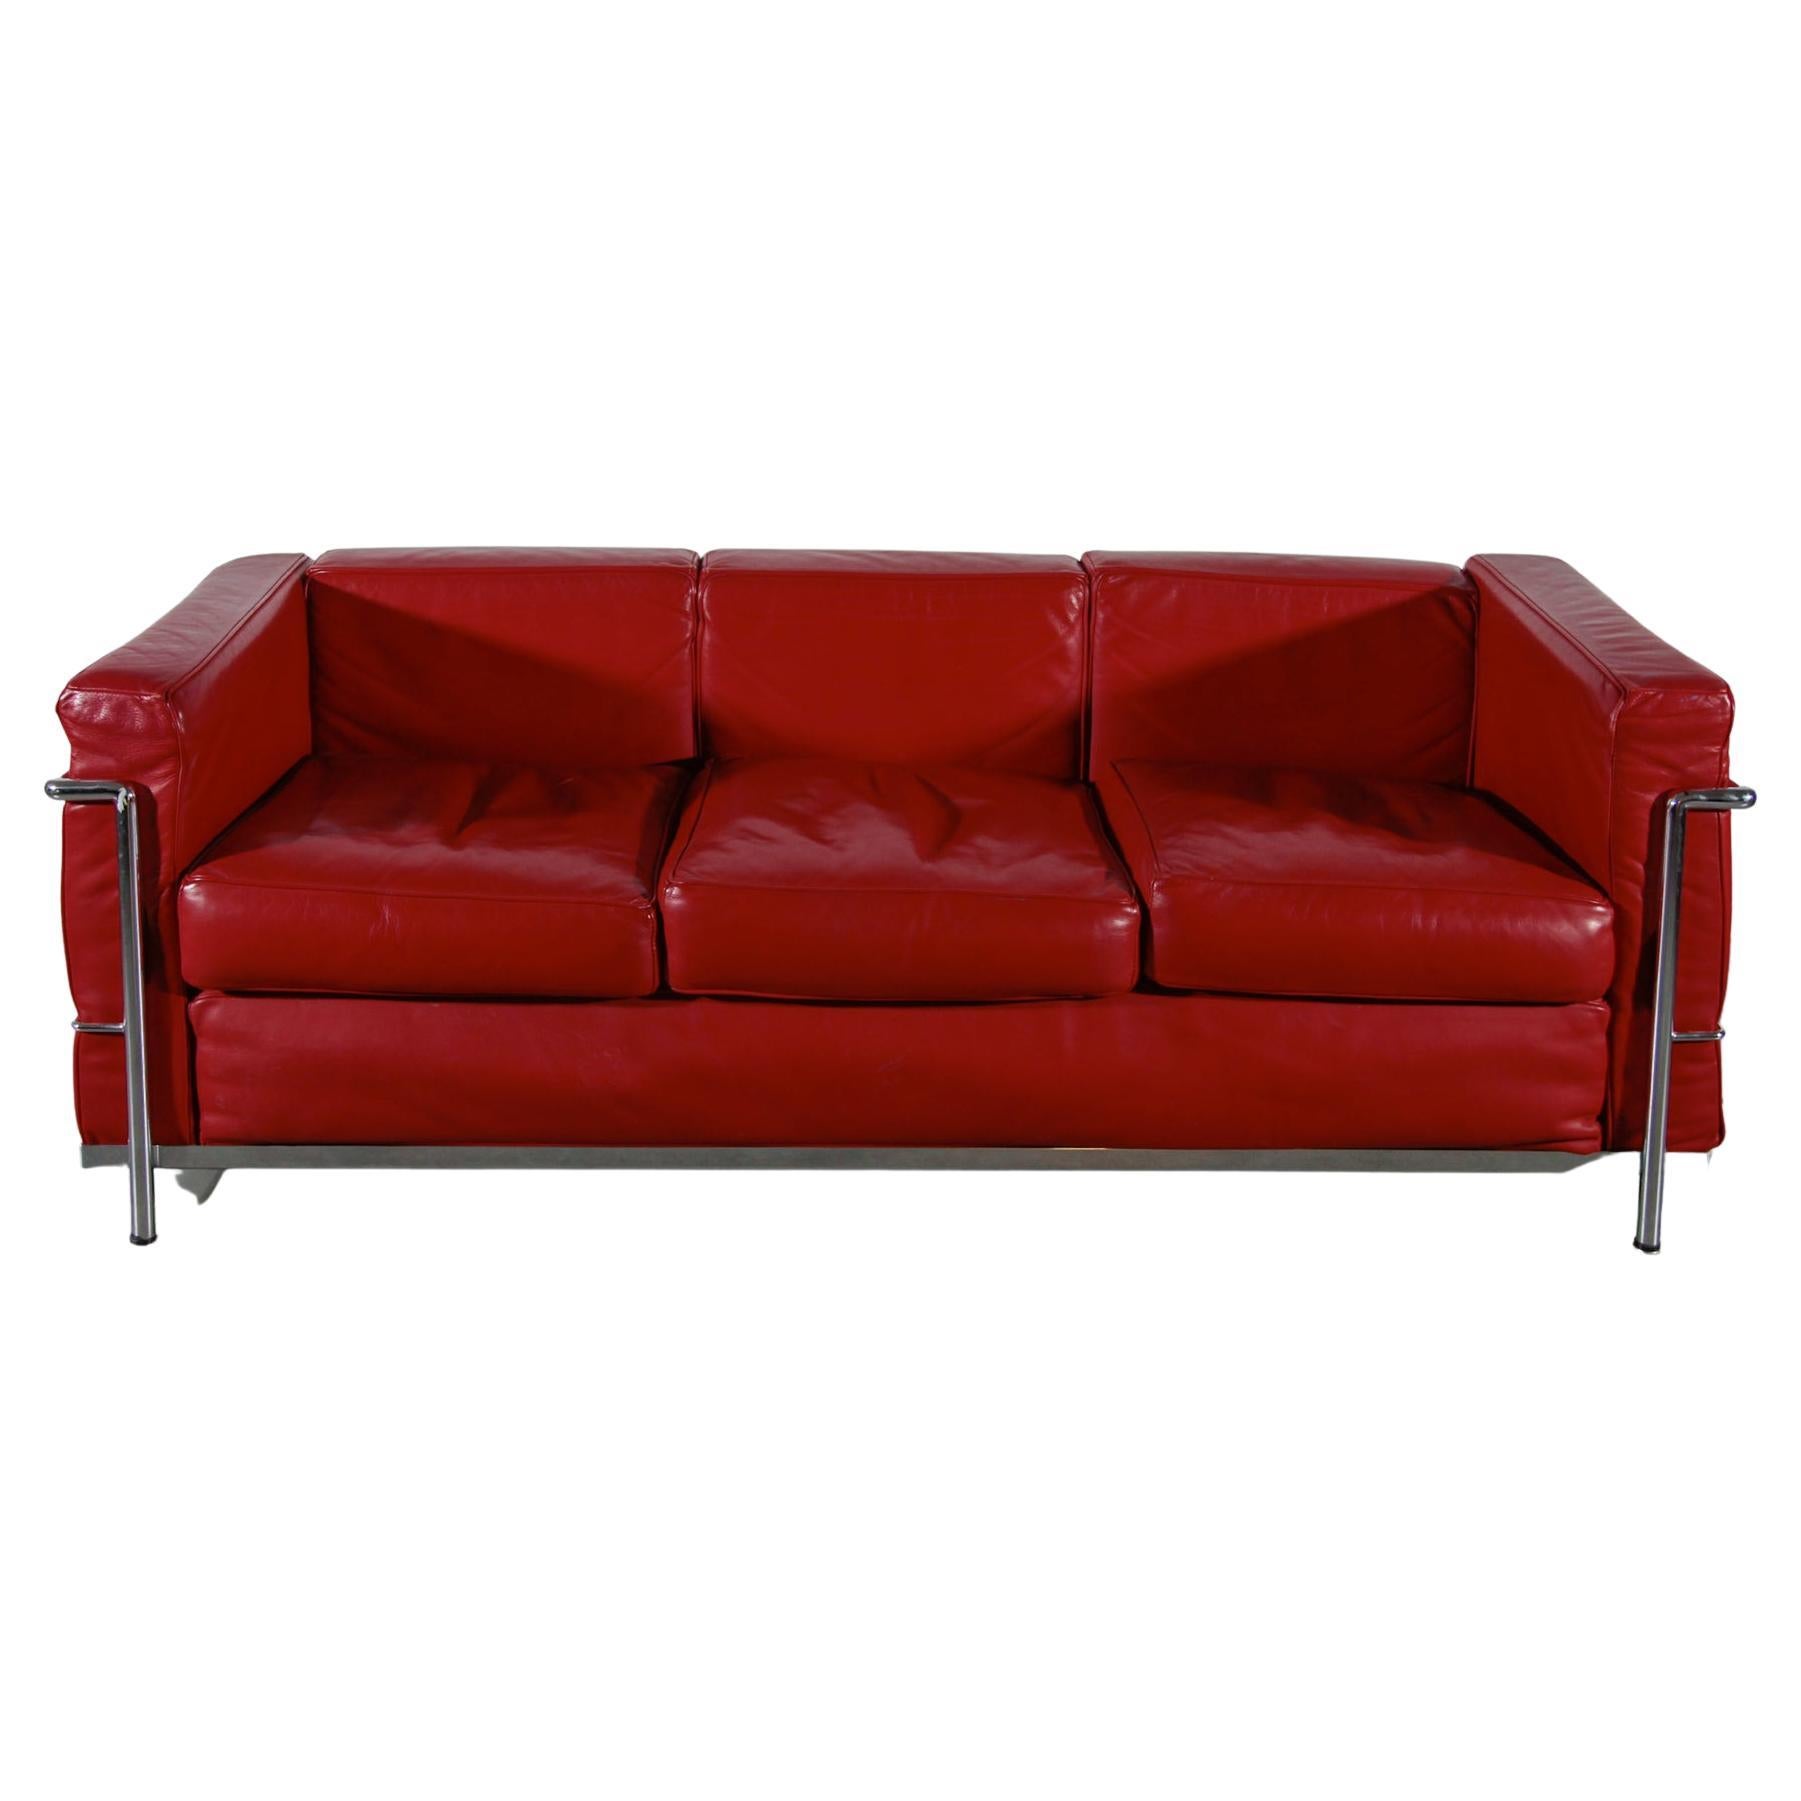 A very nice three seat sofa in red leather comfortable to sit in.The sofa is a part of our 3-piece collection and become easily recognizable by its iconic polished steel external frames. The clean, straight lines of the LC2 collection help define